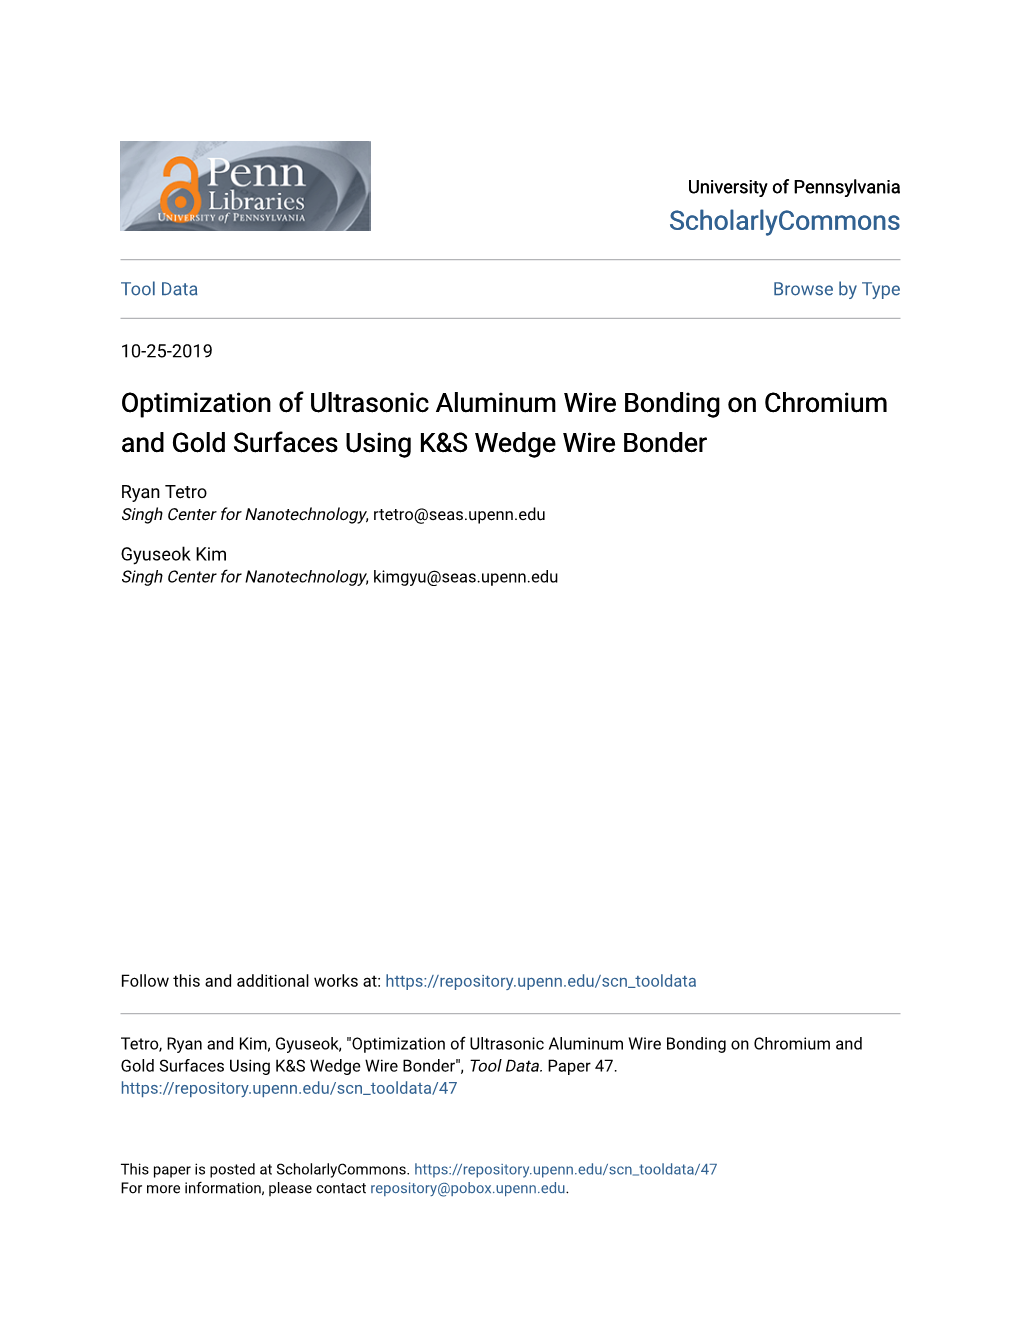 Optimization of Ultrasonic Aluminum Wire Bonding on Chromium and Gold Surfaces Using K&S Wedge Wire Bonder